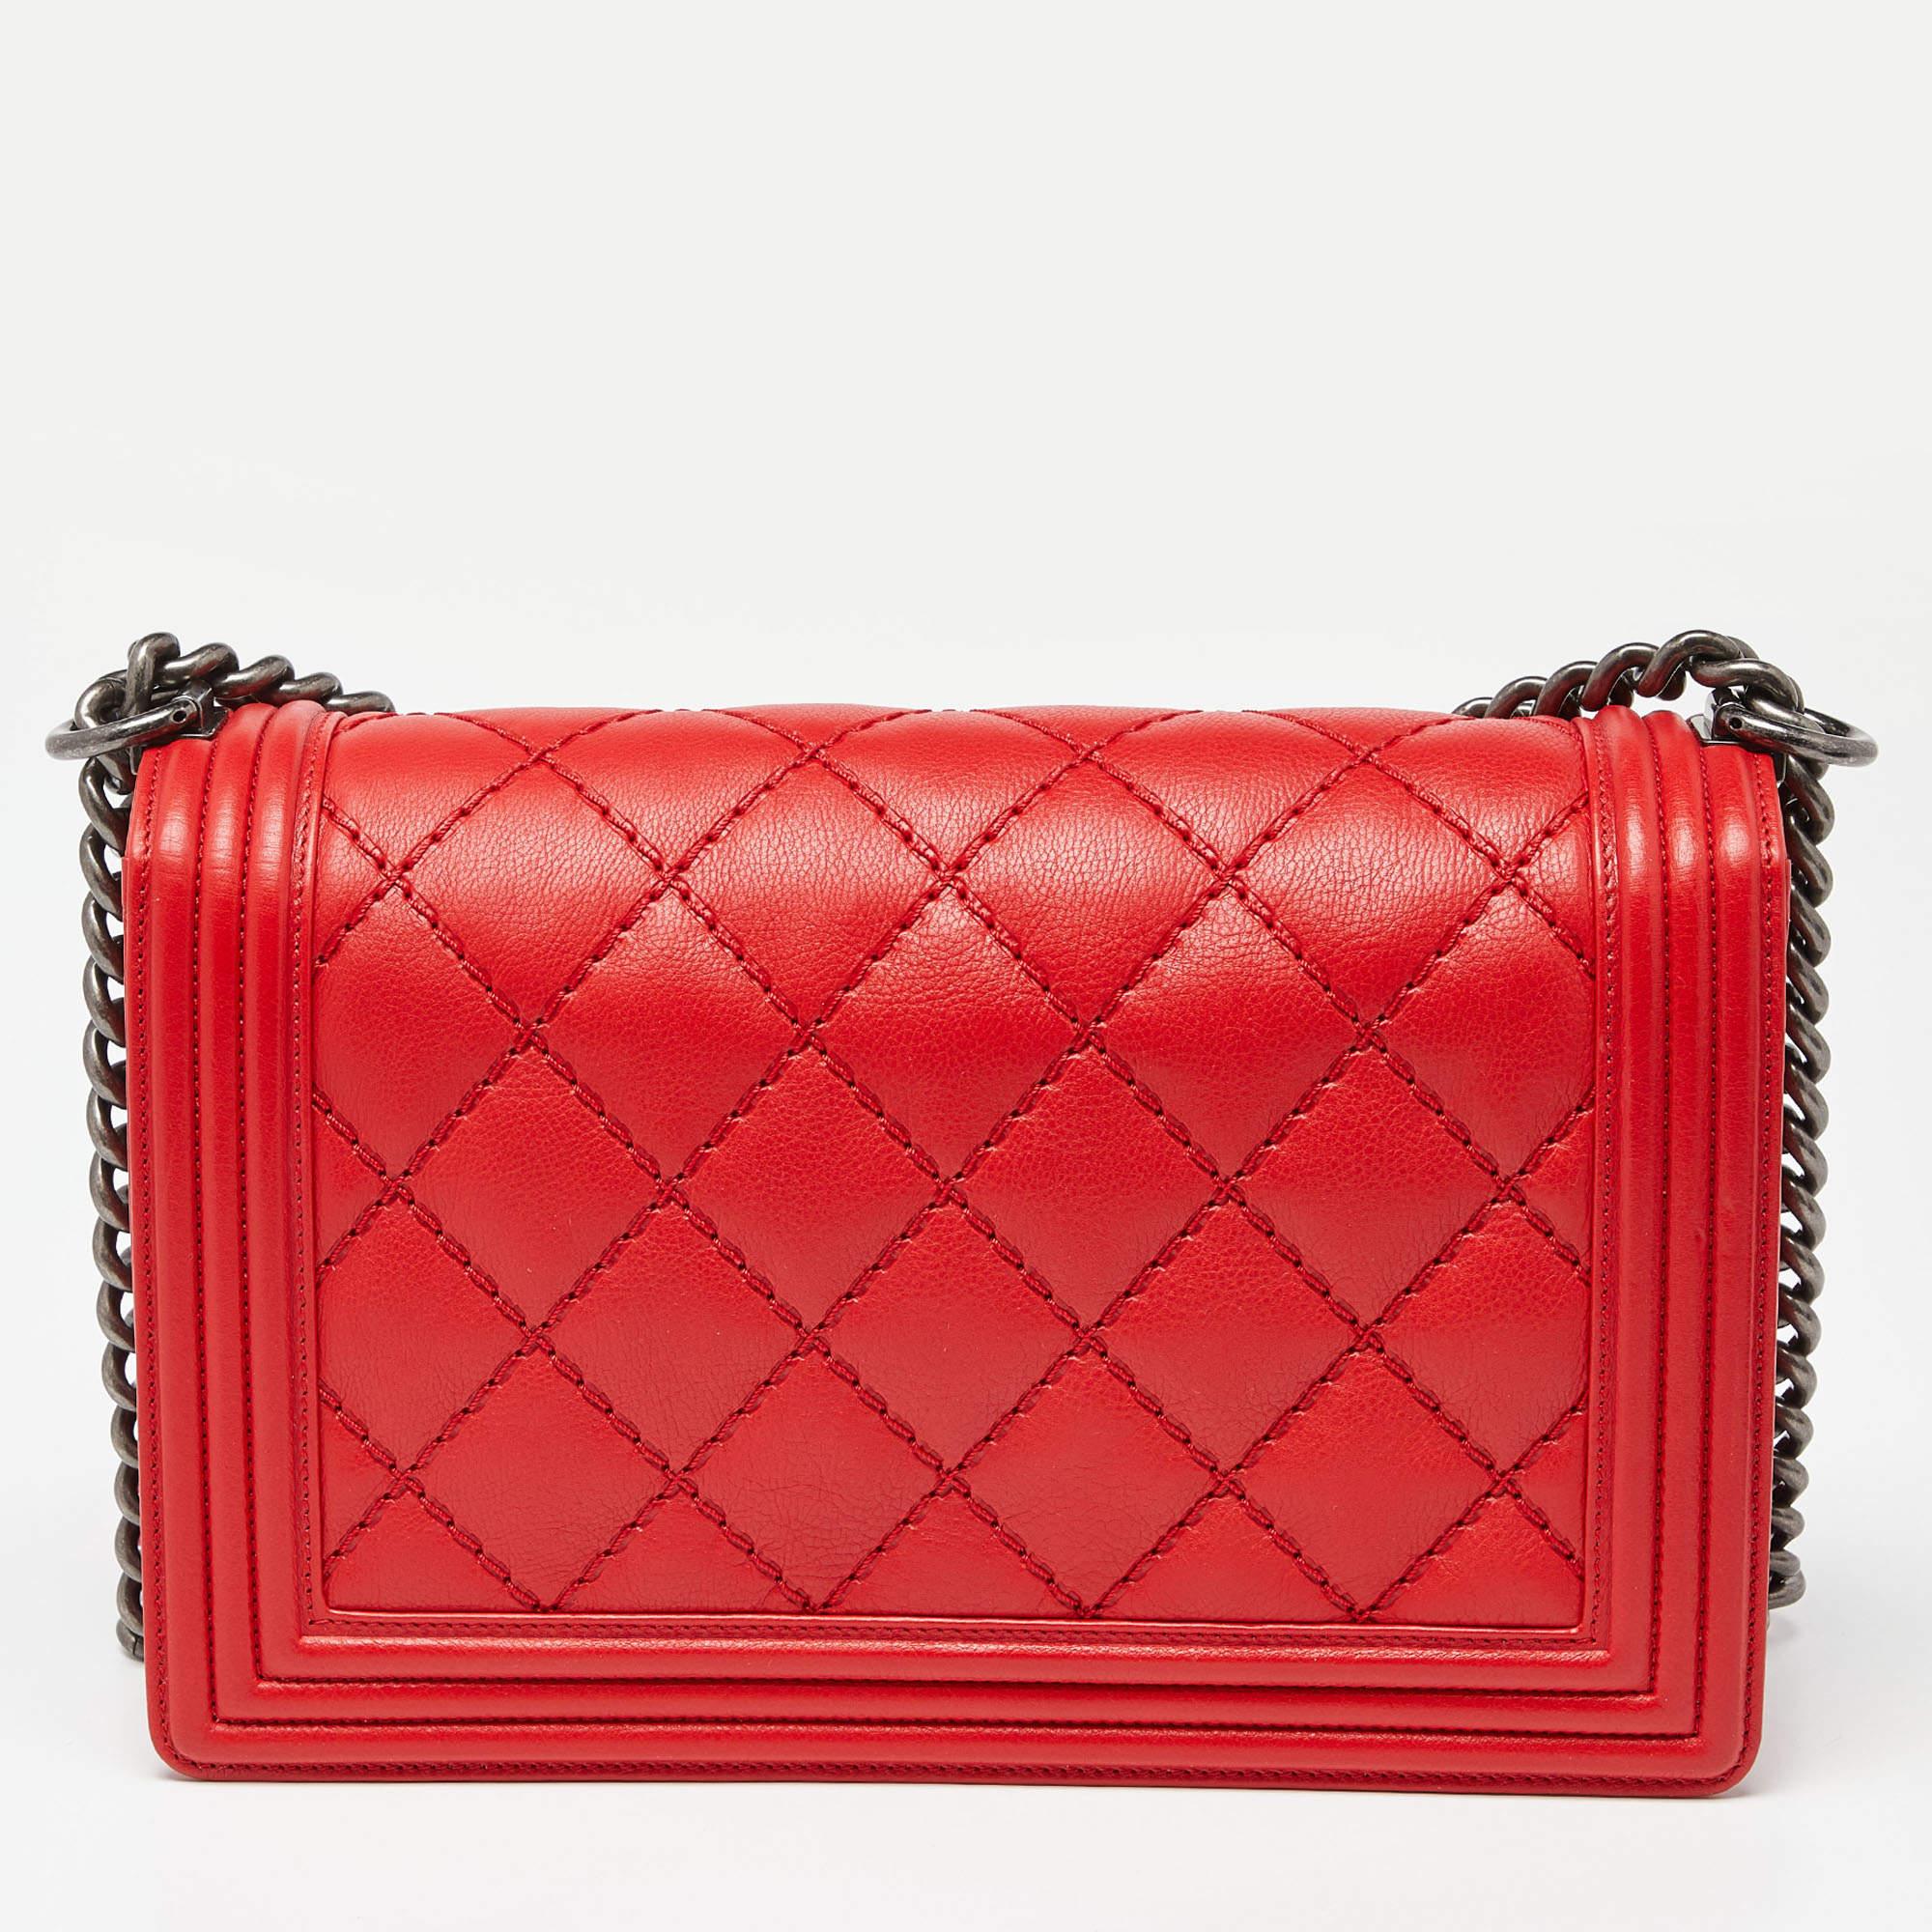 Chanel Red Diamond Stitch Quilted Leather New Medium Boy Bag 1